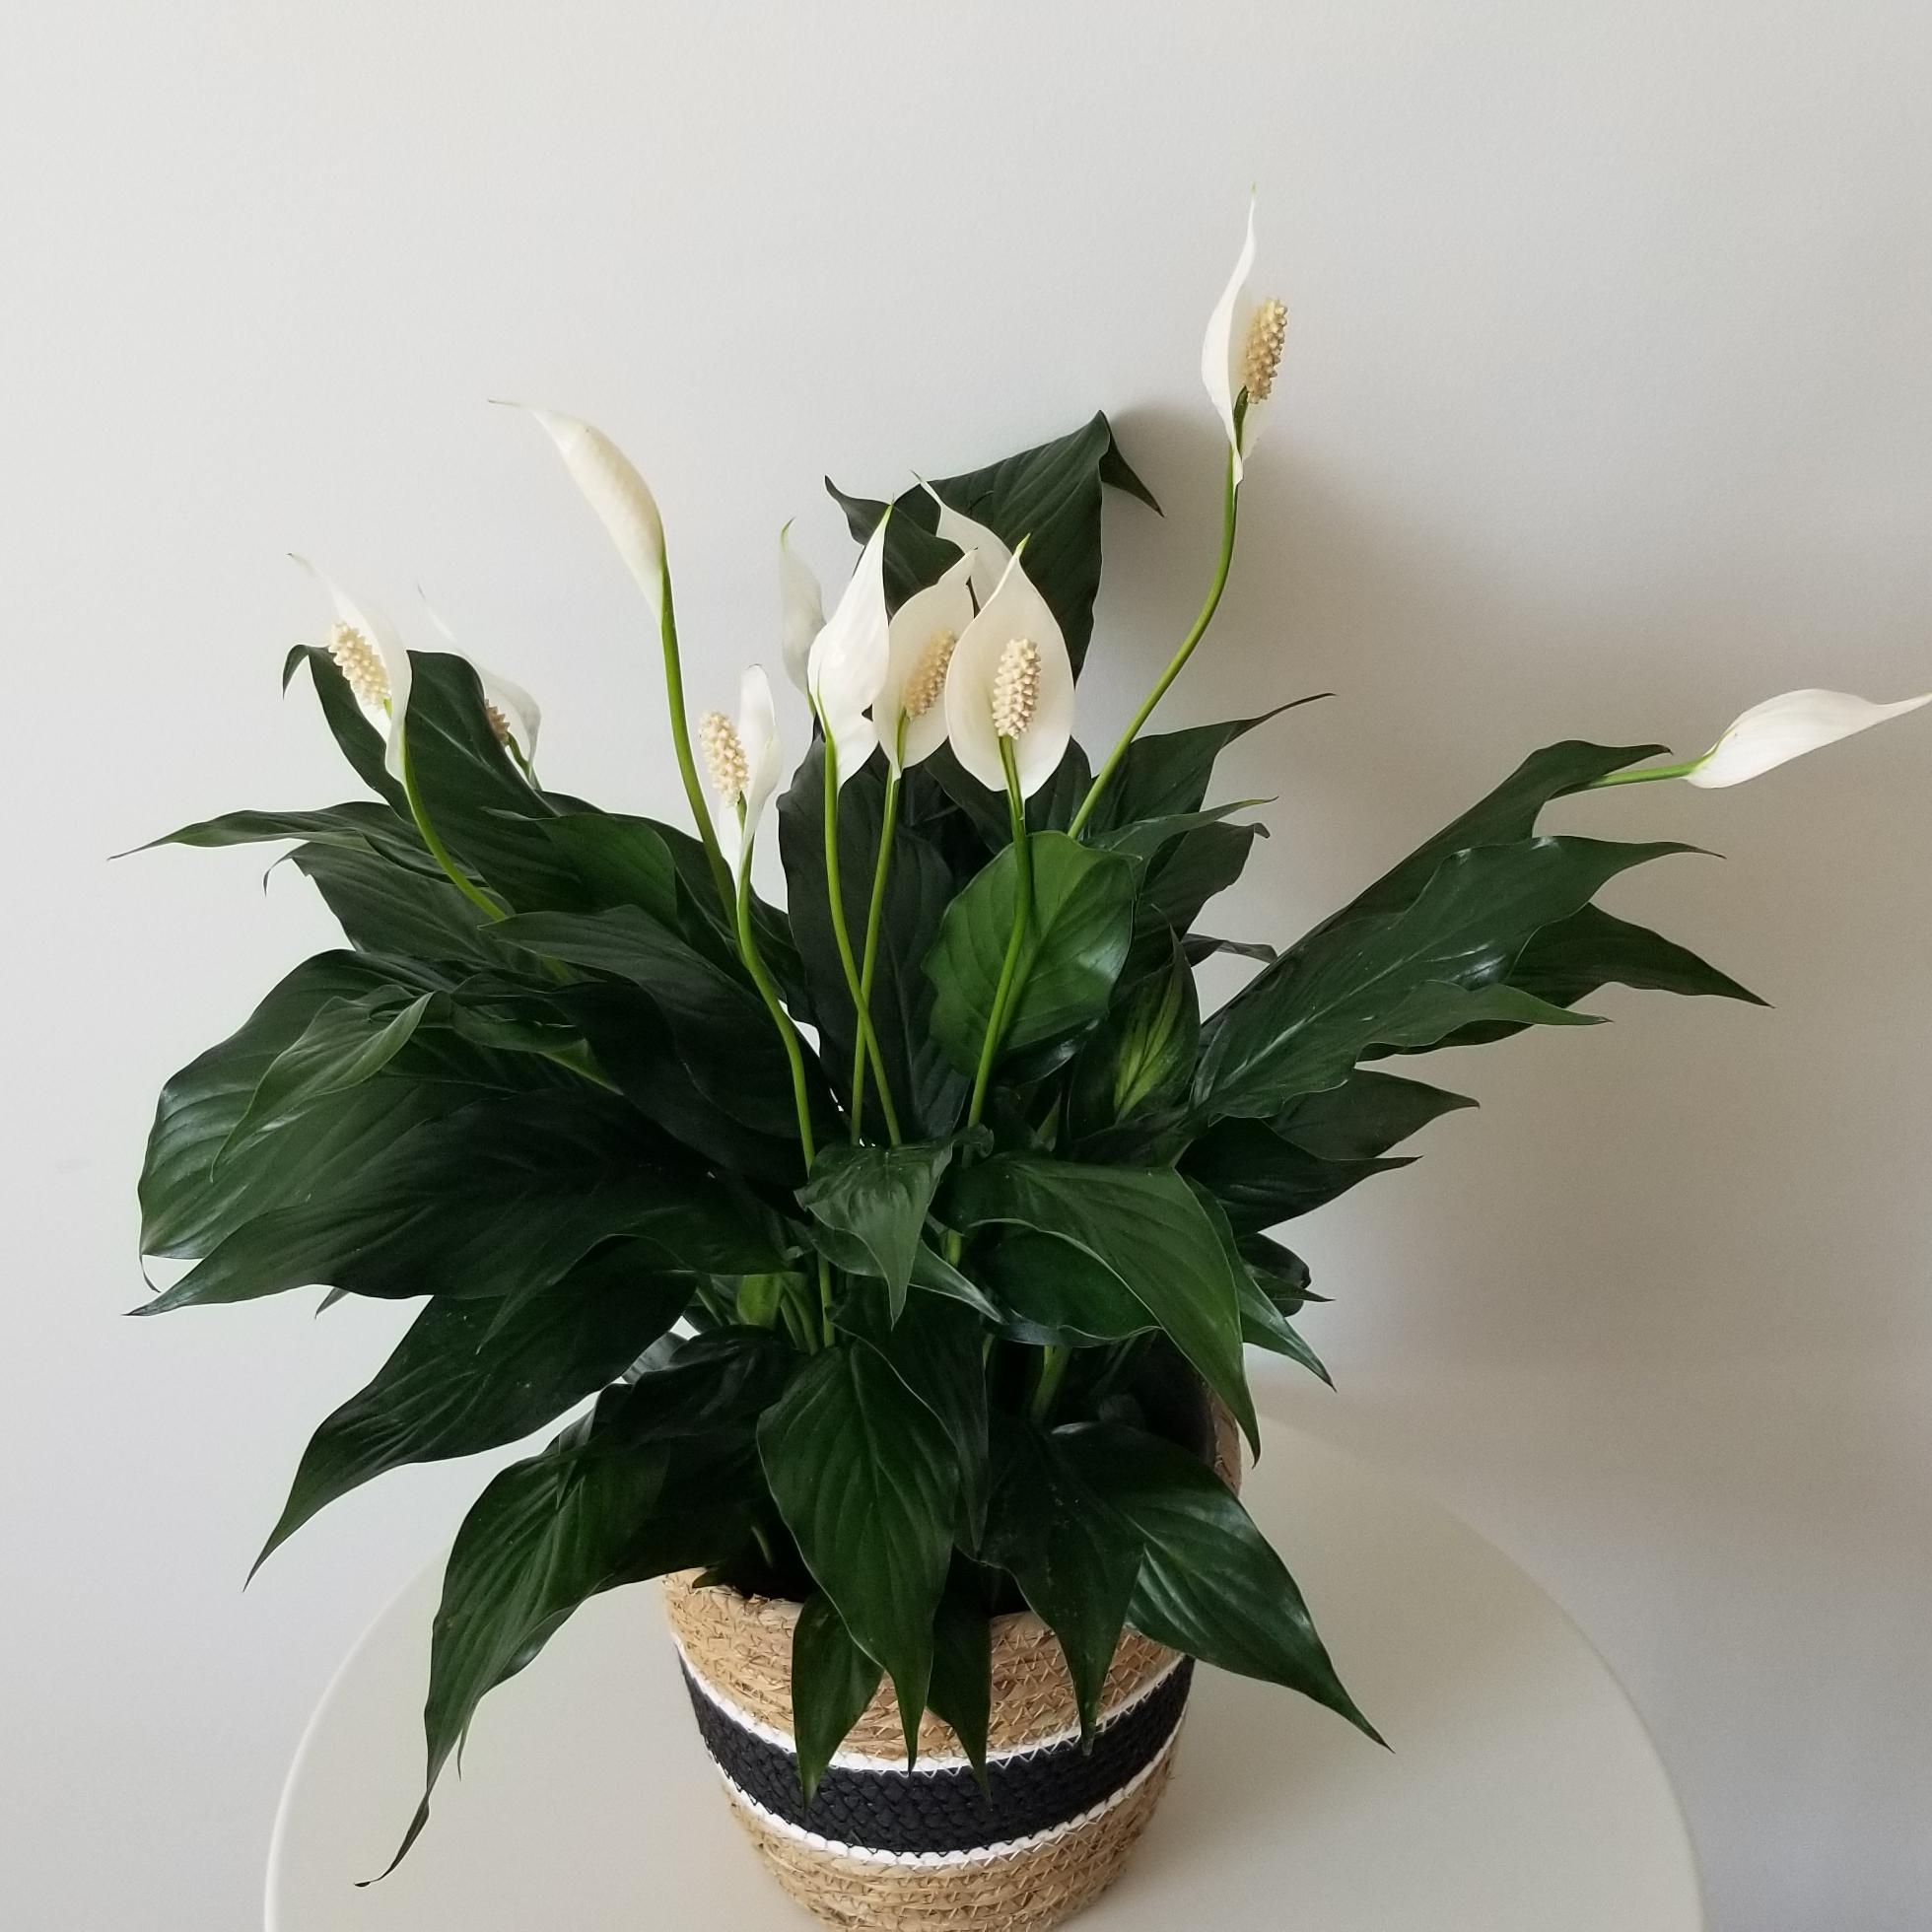 Peace Lily Mother's Day gifts air-purifying indoor plants houseplants Toronto Mississauga Etobicoke Brampton Oakville other GTA